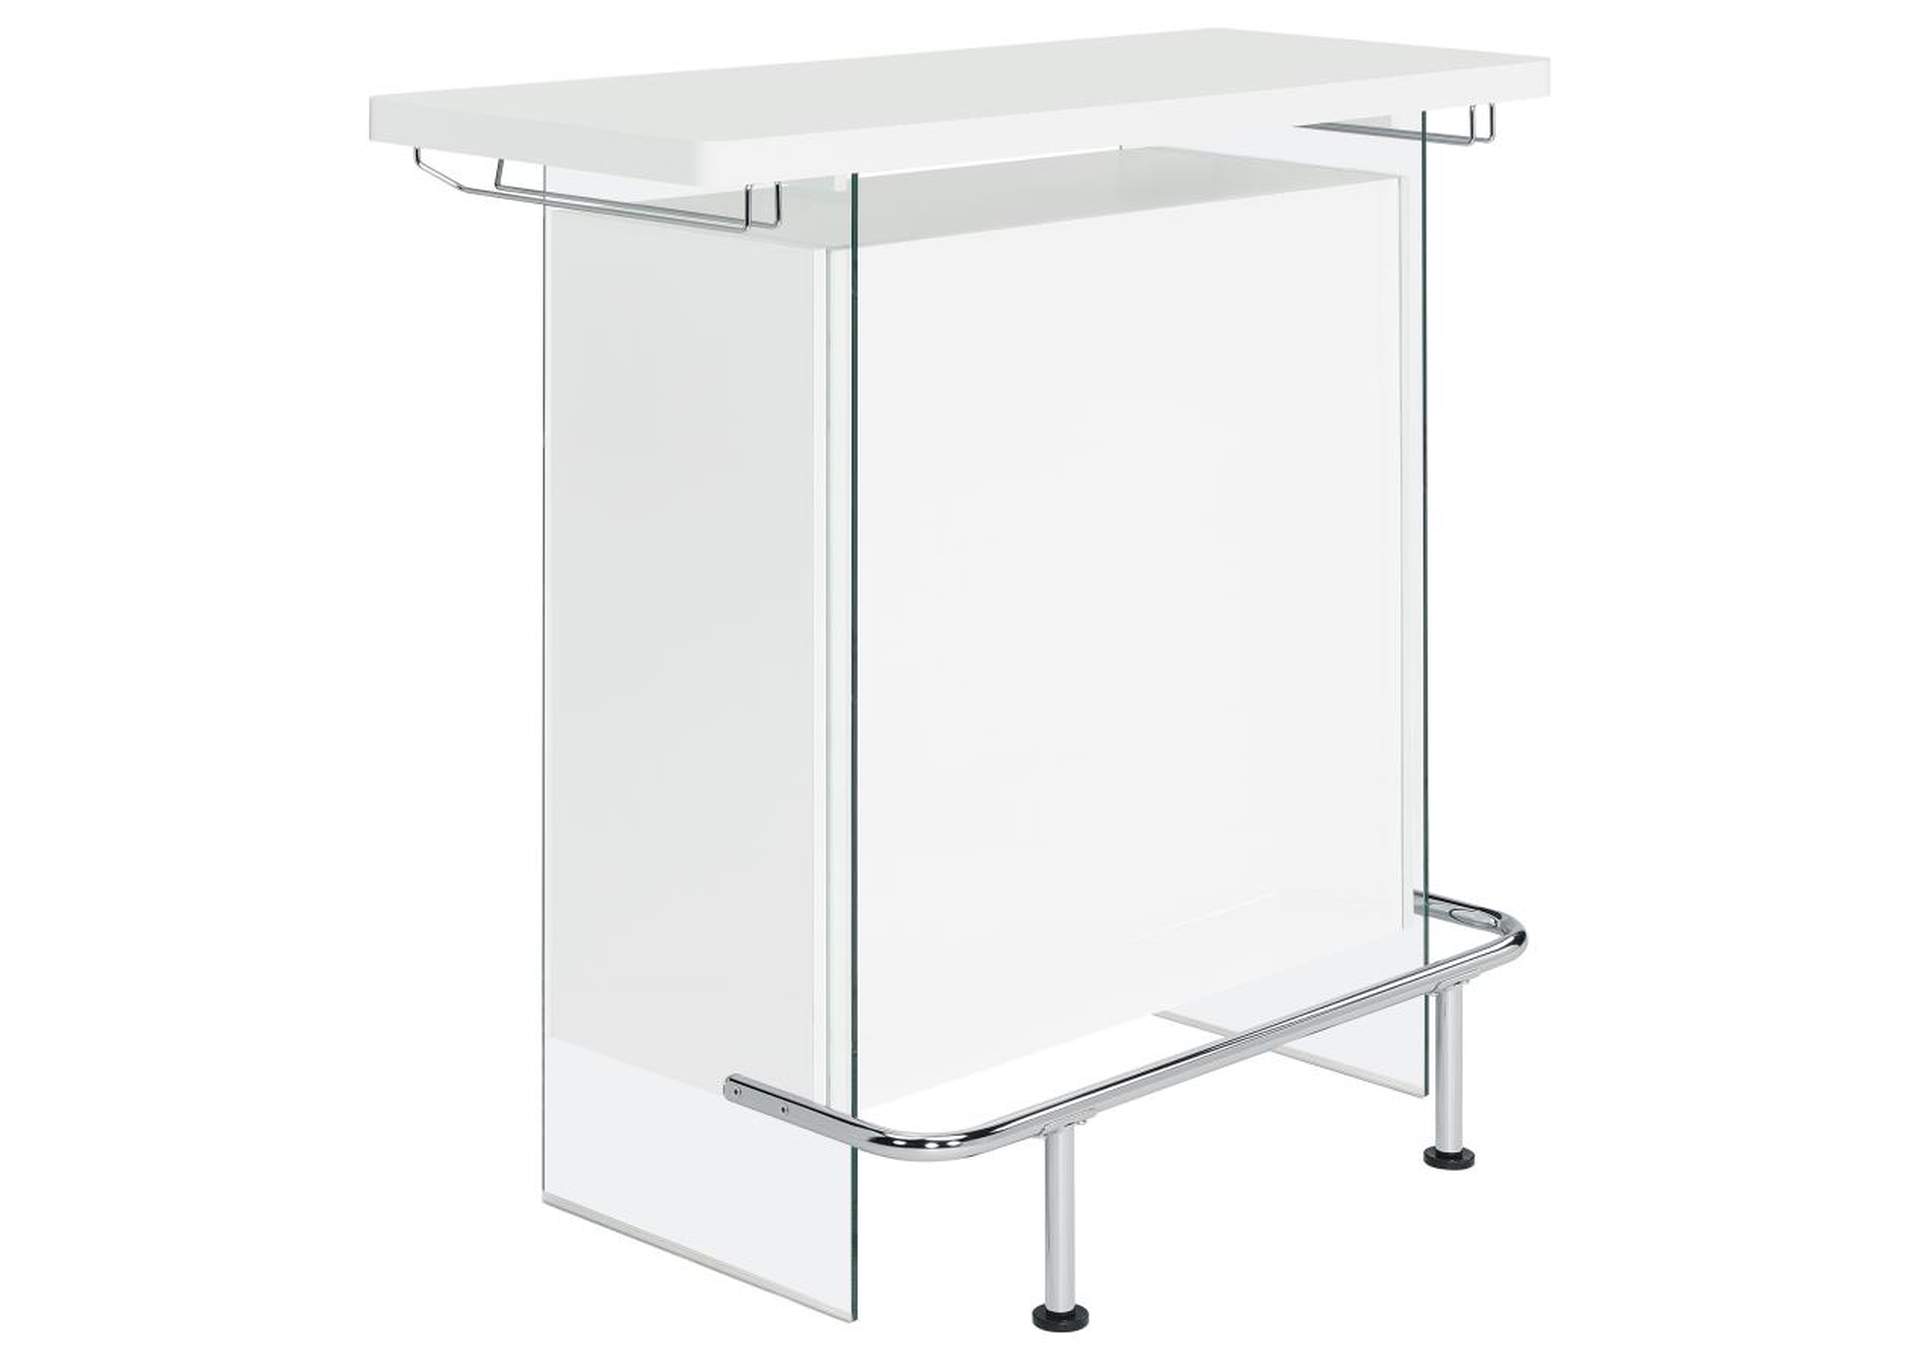 Acosta Rectangular Bar Unit With Footrest And Glass Side Panels,Coaster Furniture